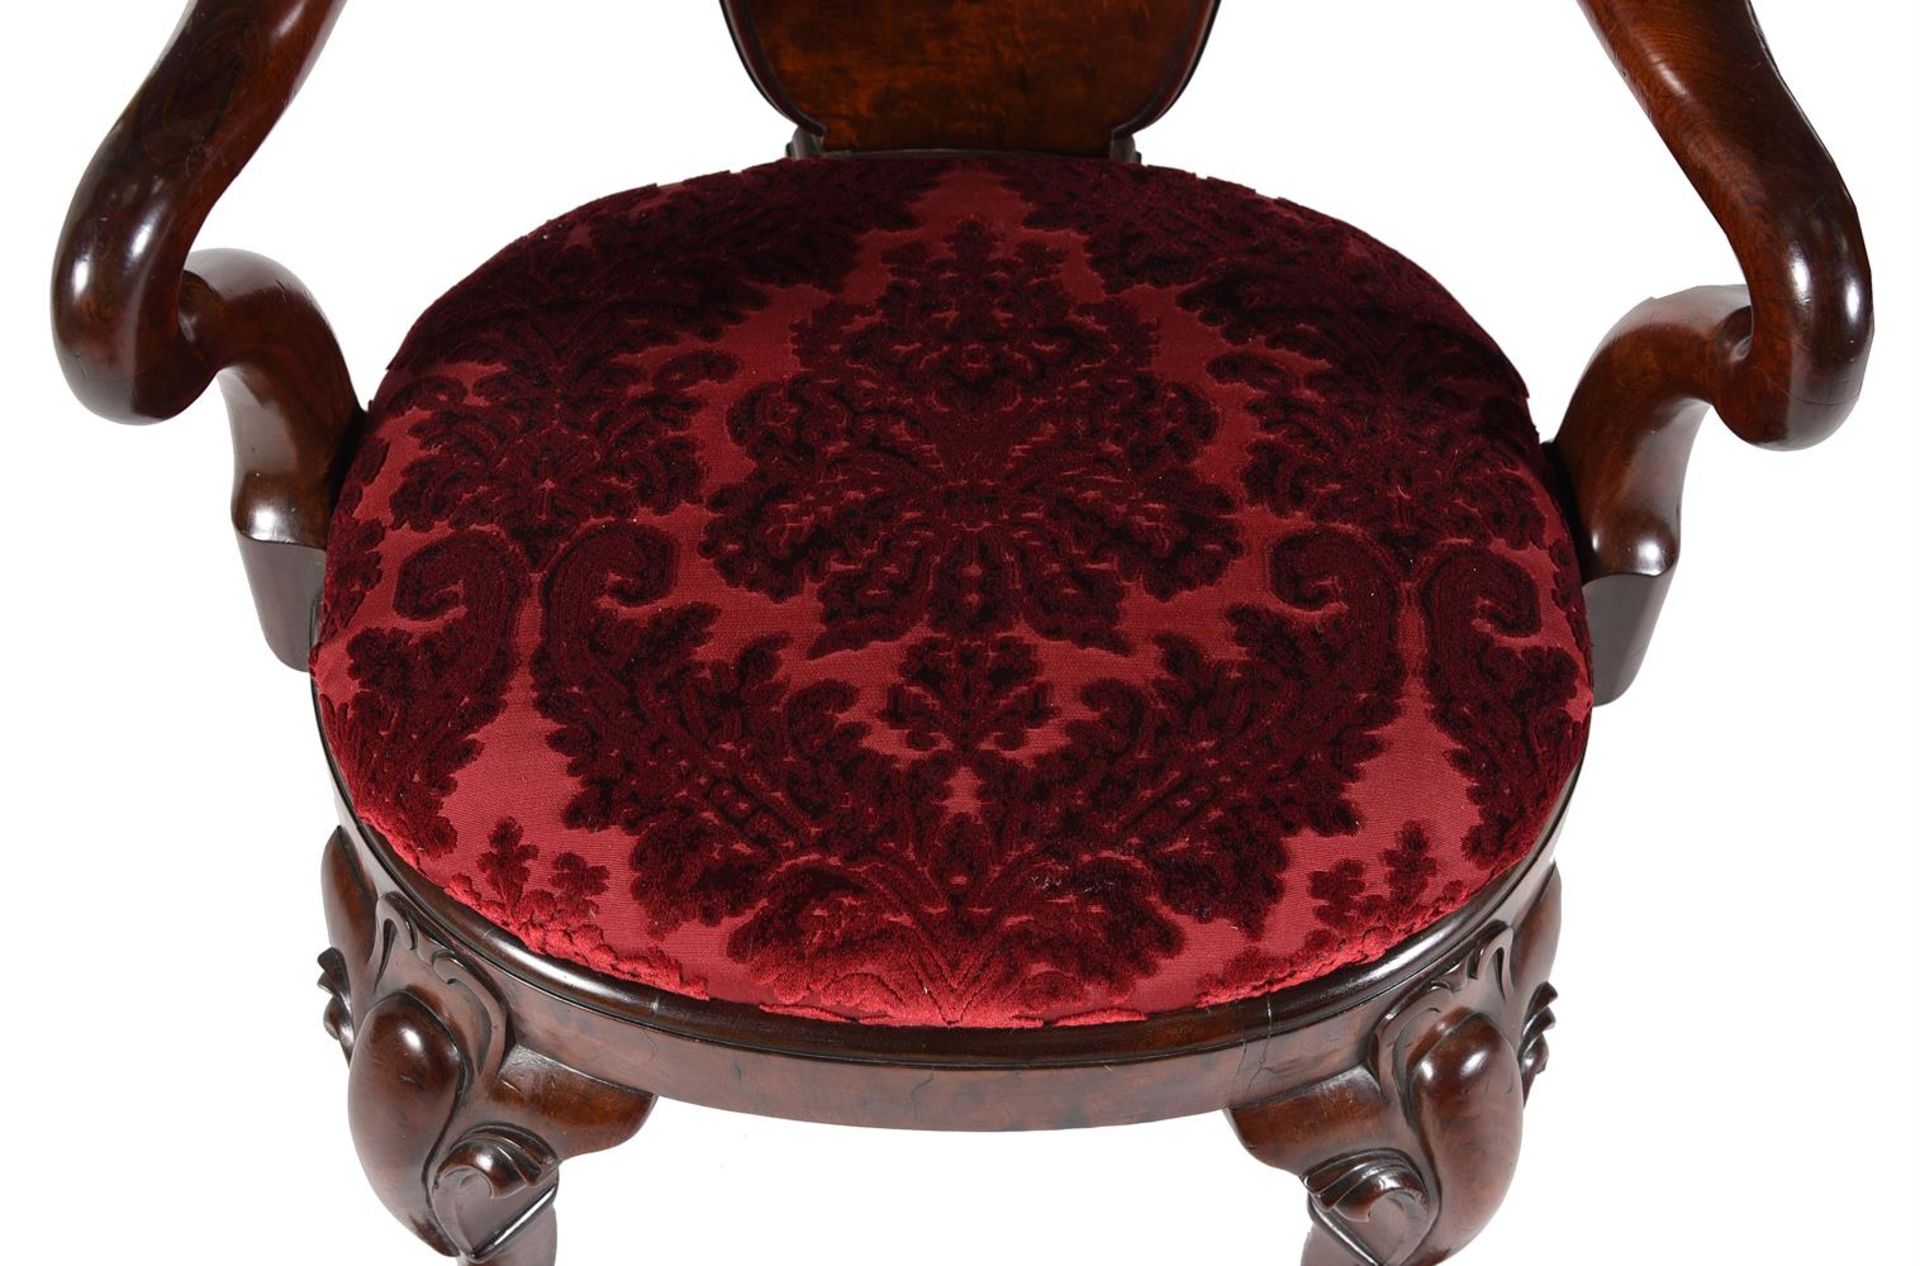 A PAIR OF WILLIAM IV MAHOGANY AND 'PLUM PUDDING' MAHOGANY ARMCHAIRS, ATTRIBUTED TO GILLOWS - Image 5 of 6